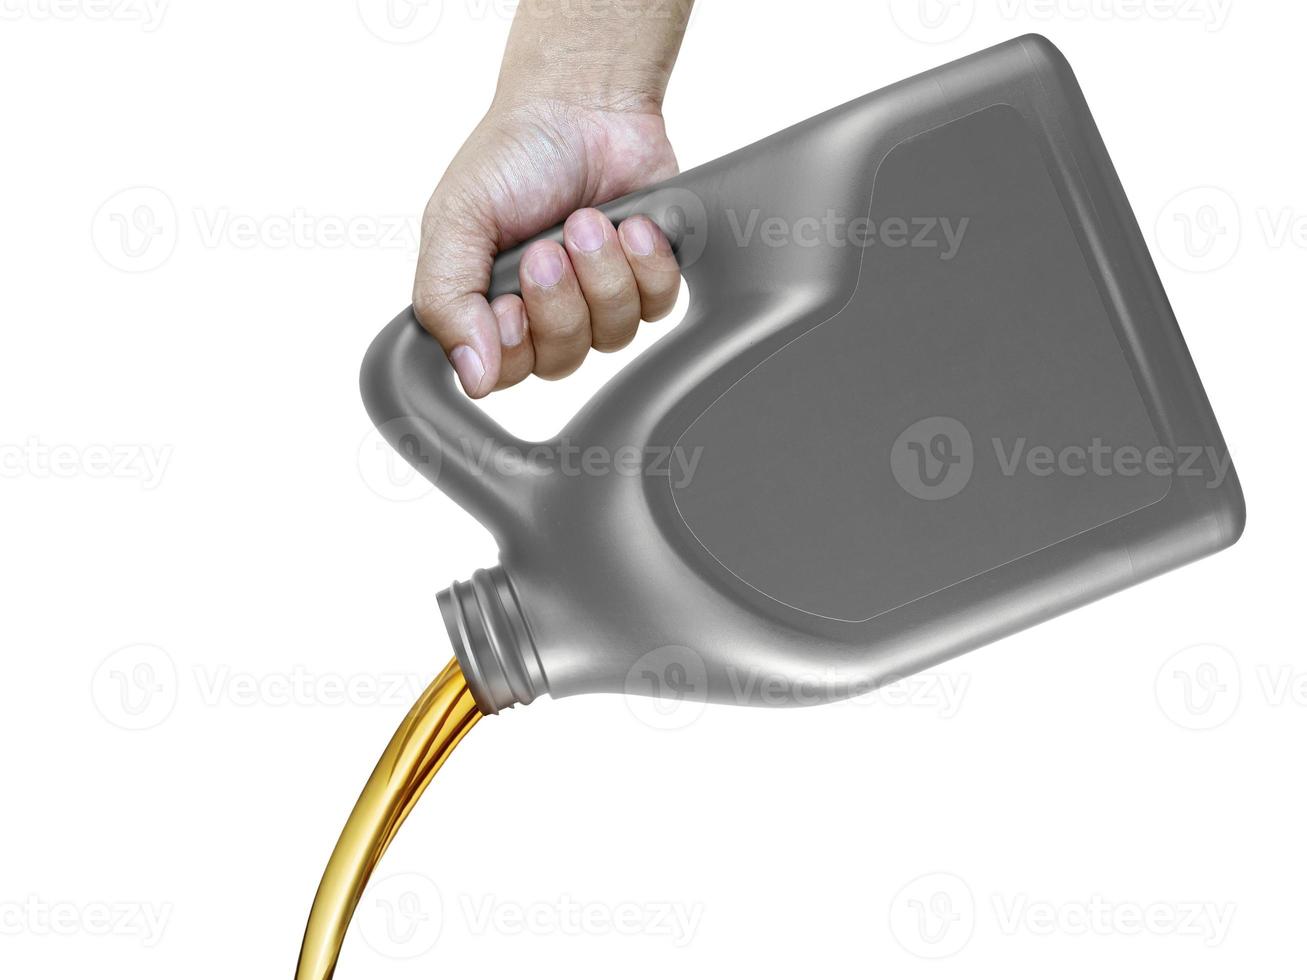 Engine oil pouring from a canister in hand isolated on white background photo